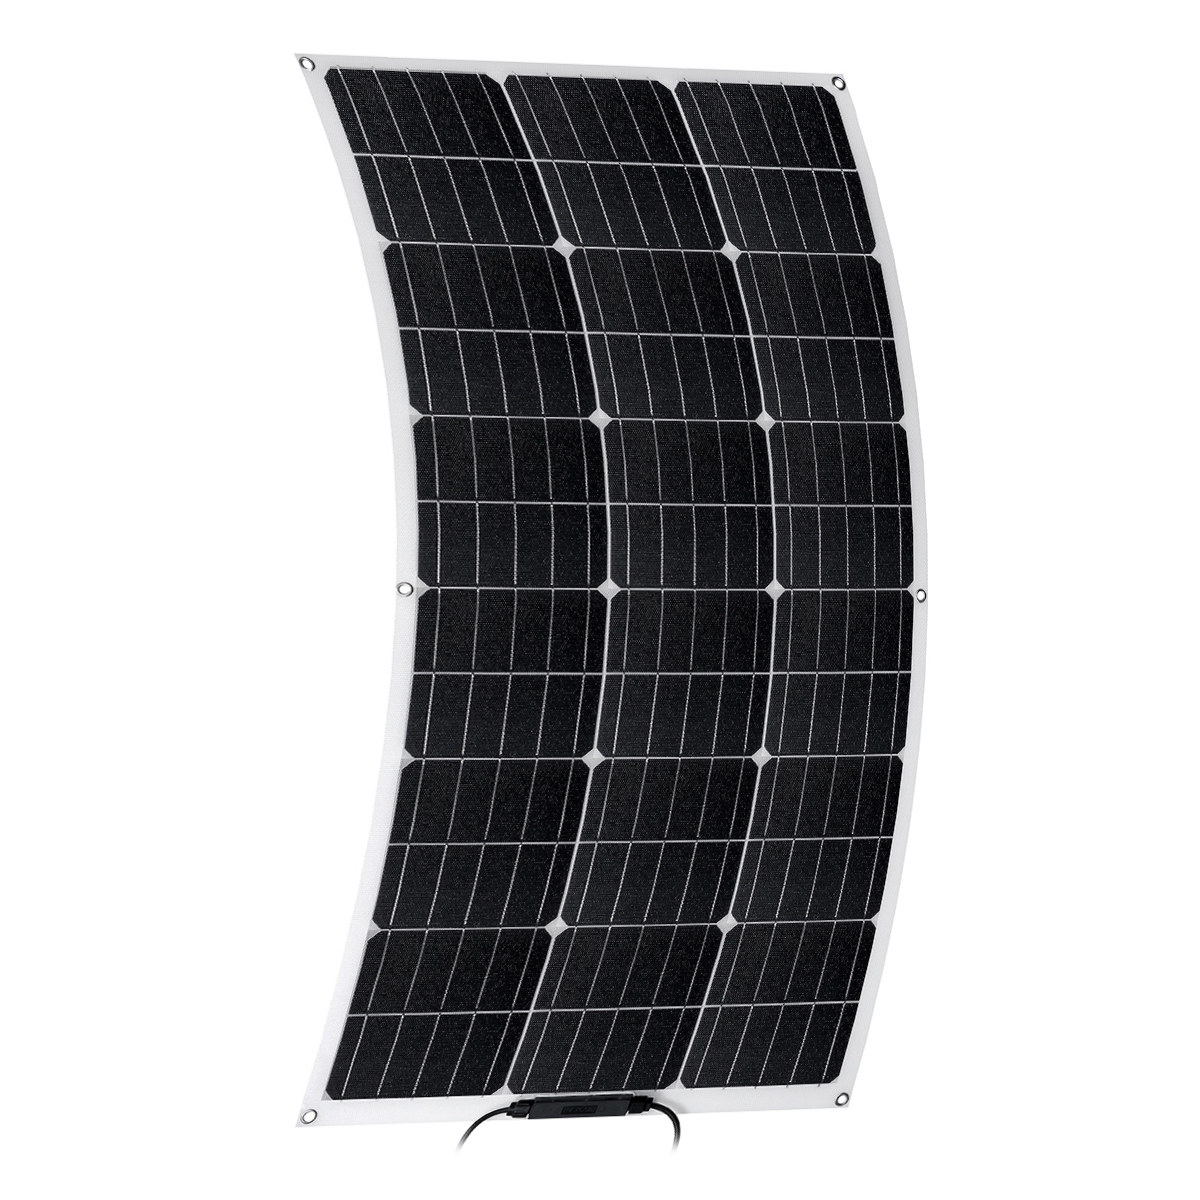 90W-18V-ETFE-Universal-Solar-Panel-Battery-Charger-Power-Charge-Kit-For-RV-Car-Boat-Camping-1721129-6